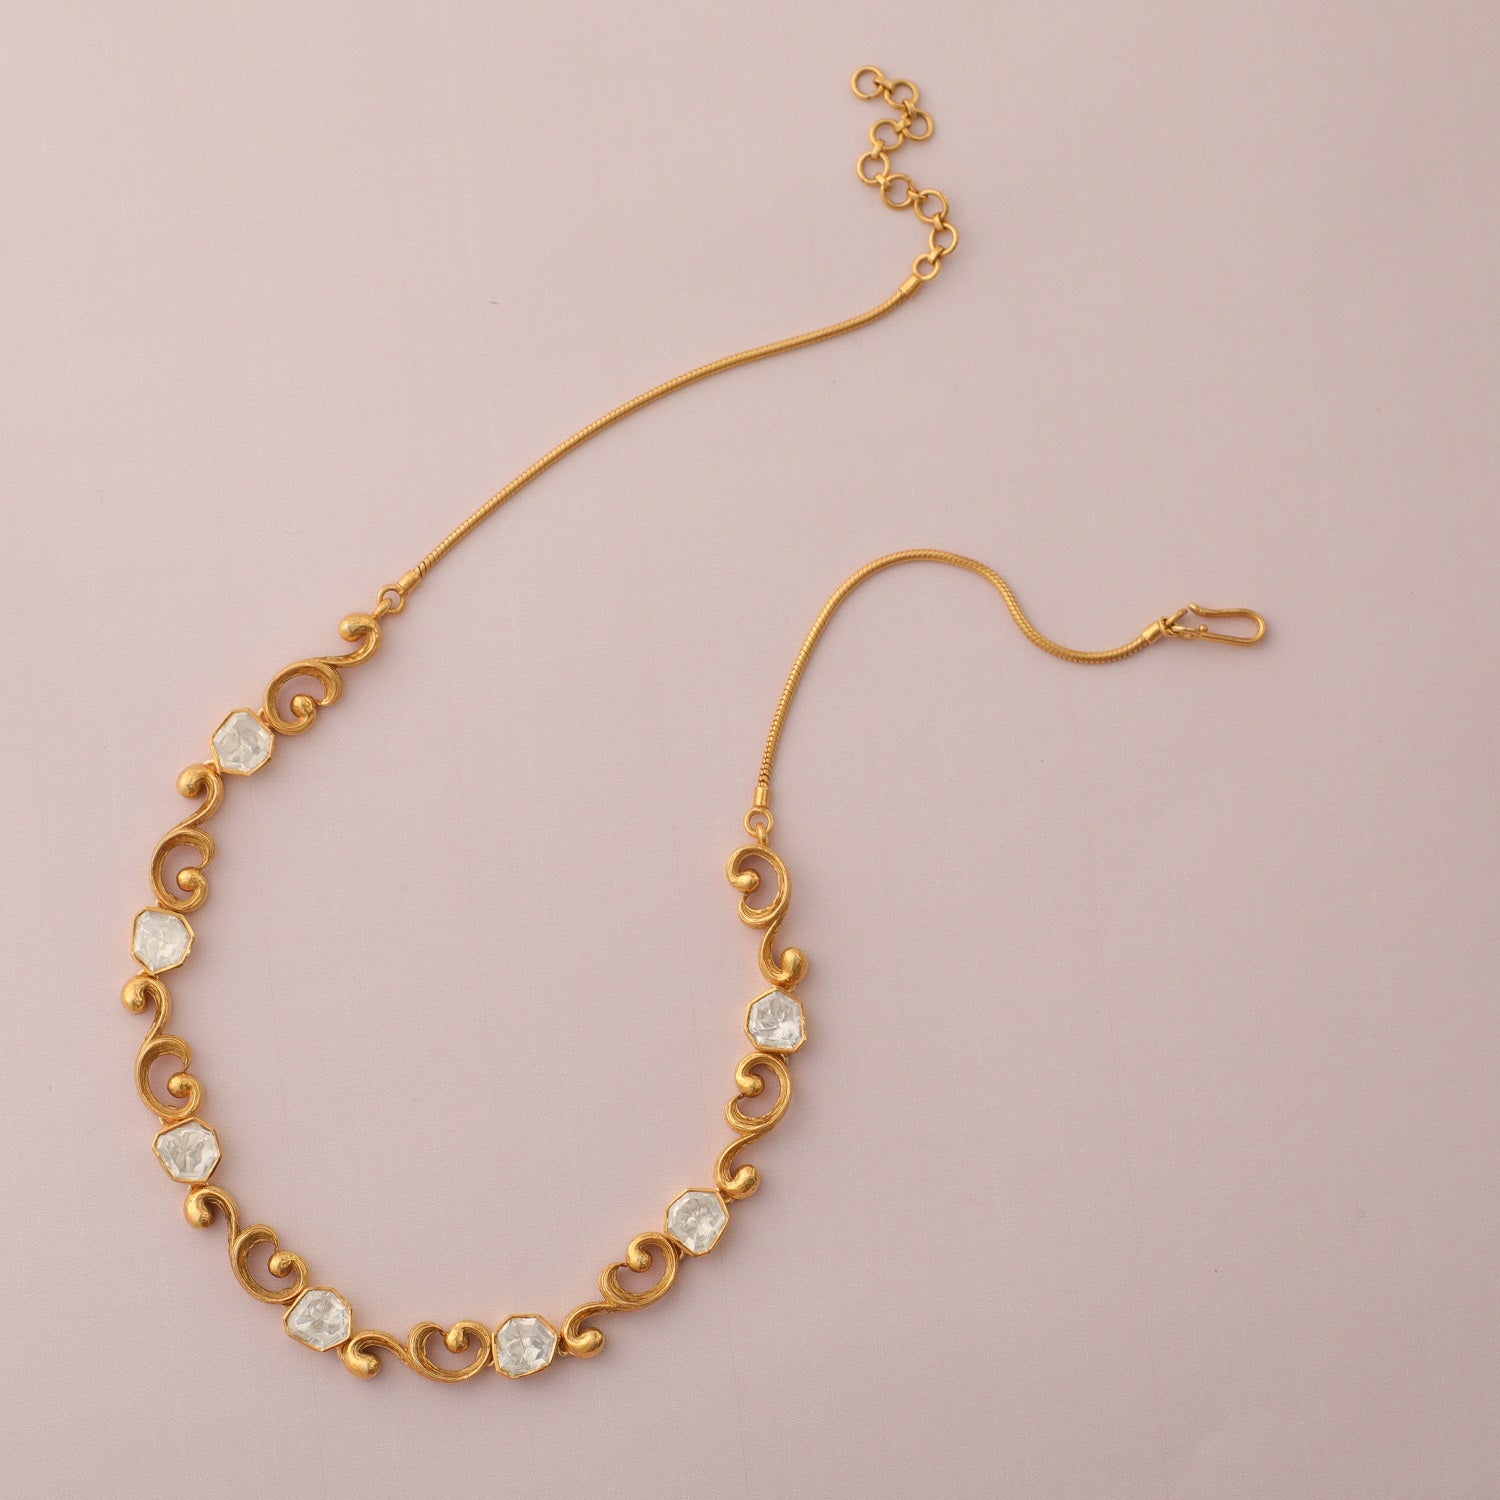 Latest Gold Chain Designs For Ladies To Discover